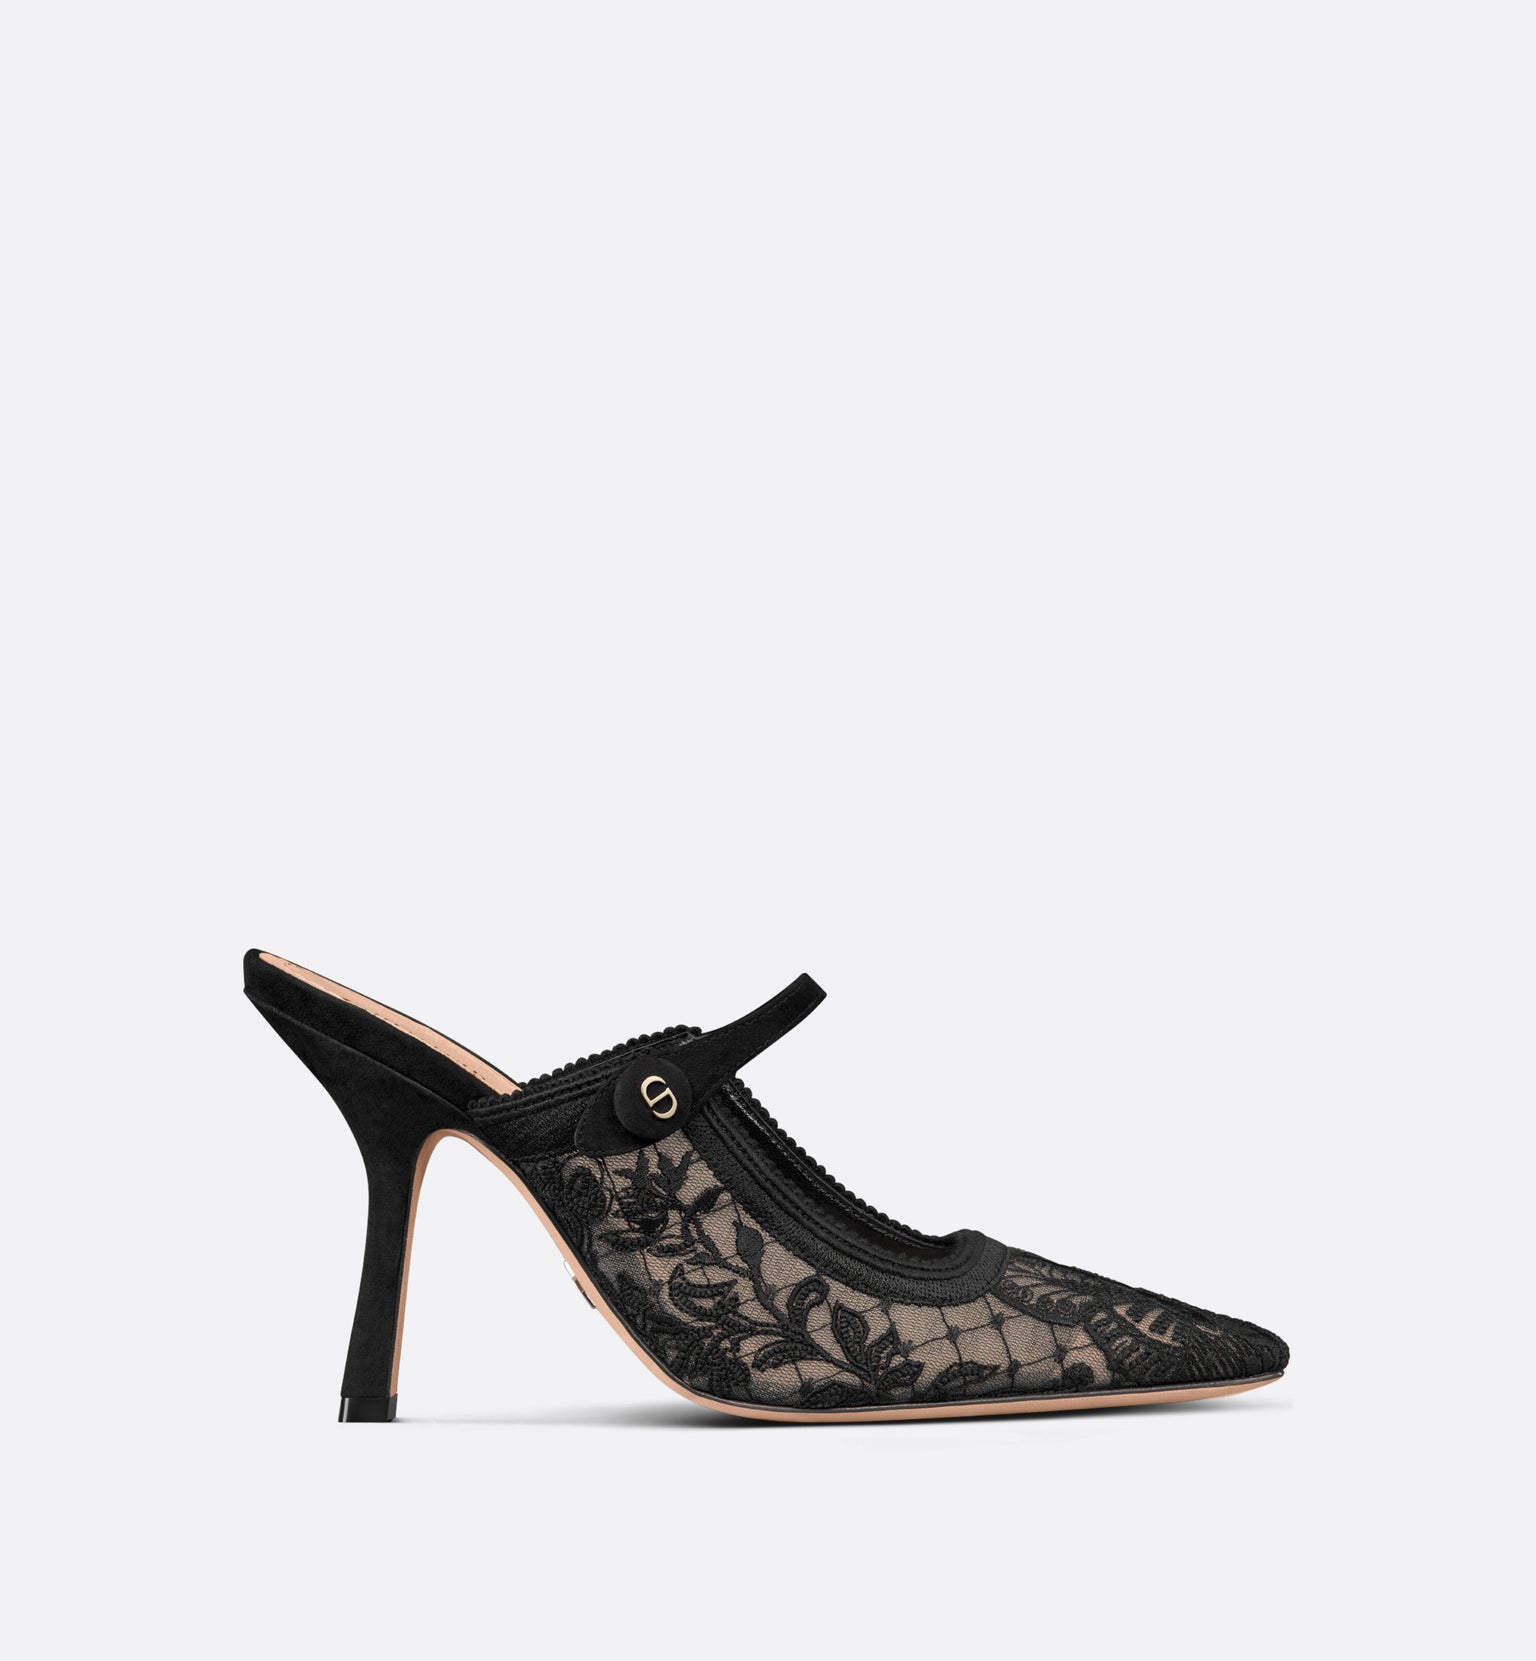 Dior Capture Heeled Mule • Transparent Mesh Embroidered with Black Butterfly Motif and Suede Calfskin